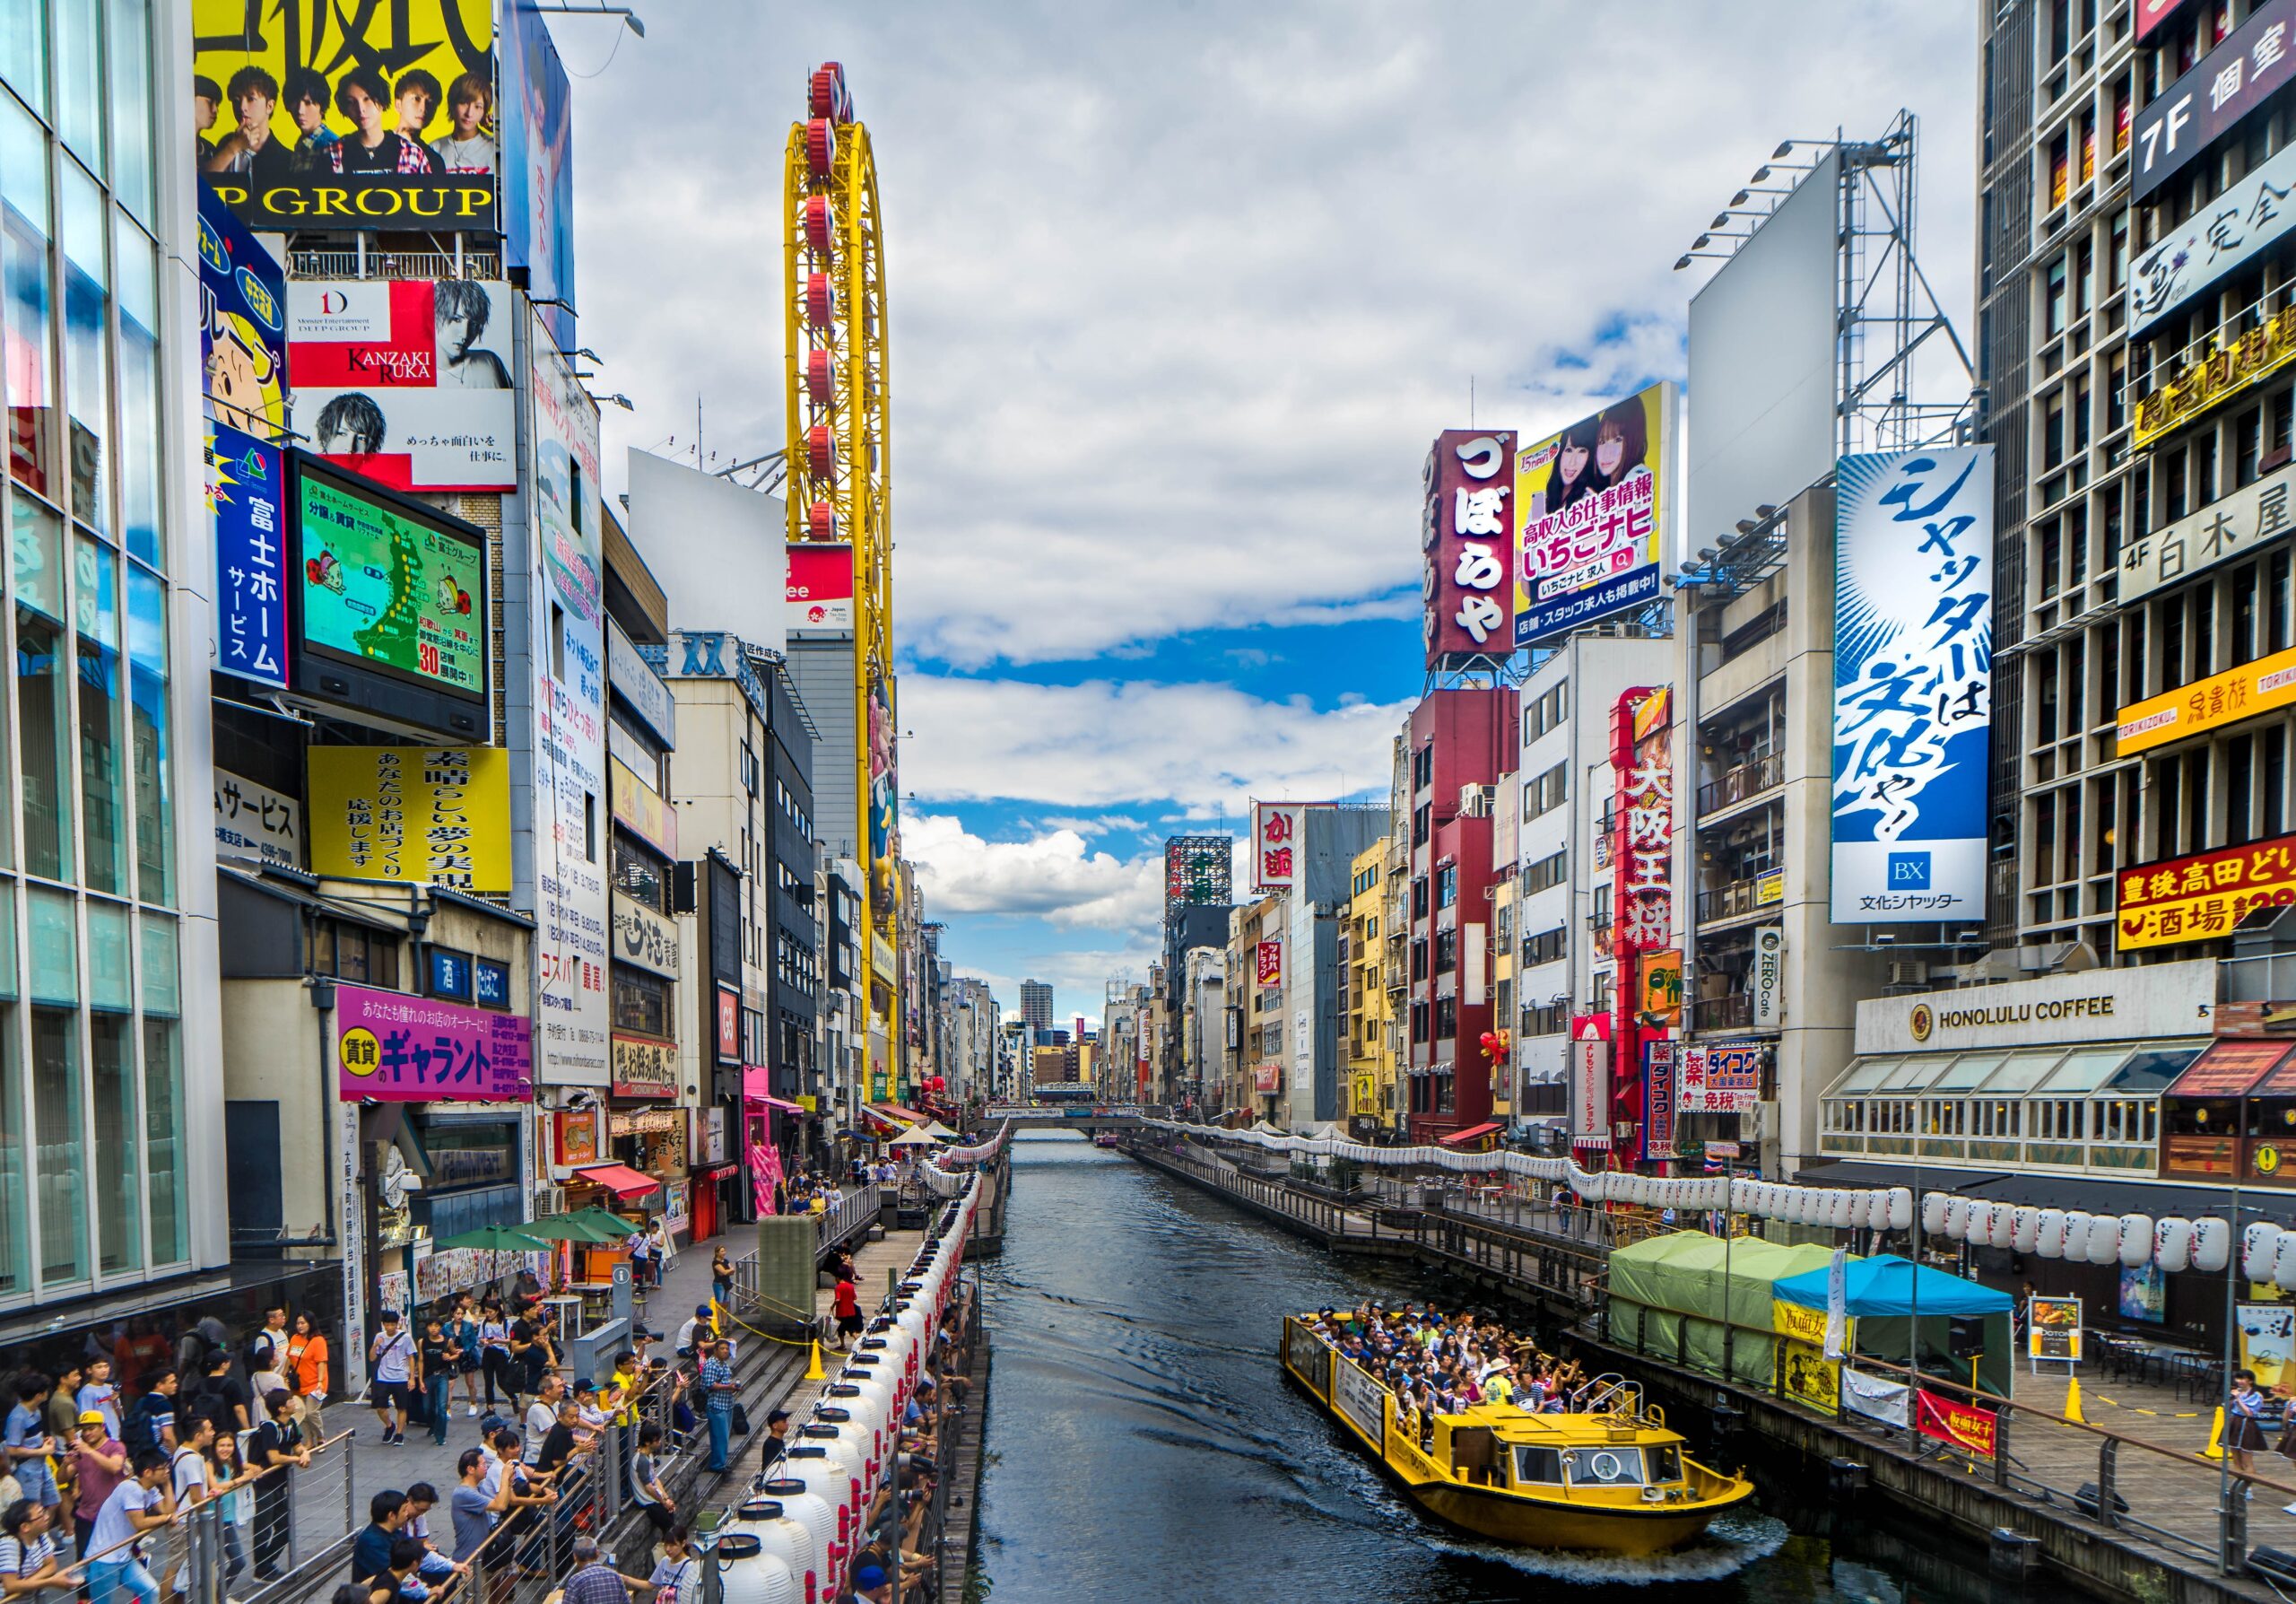 Neon Lights, Shrines and Castles: The 16 Best Things to Do in Osaka